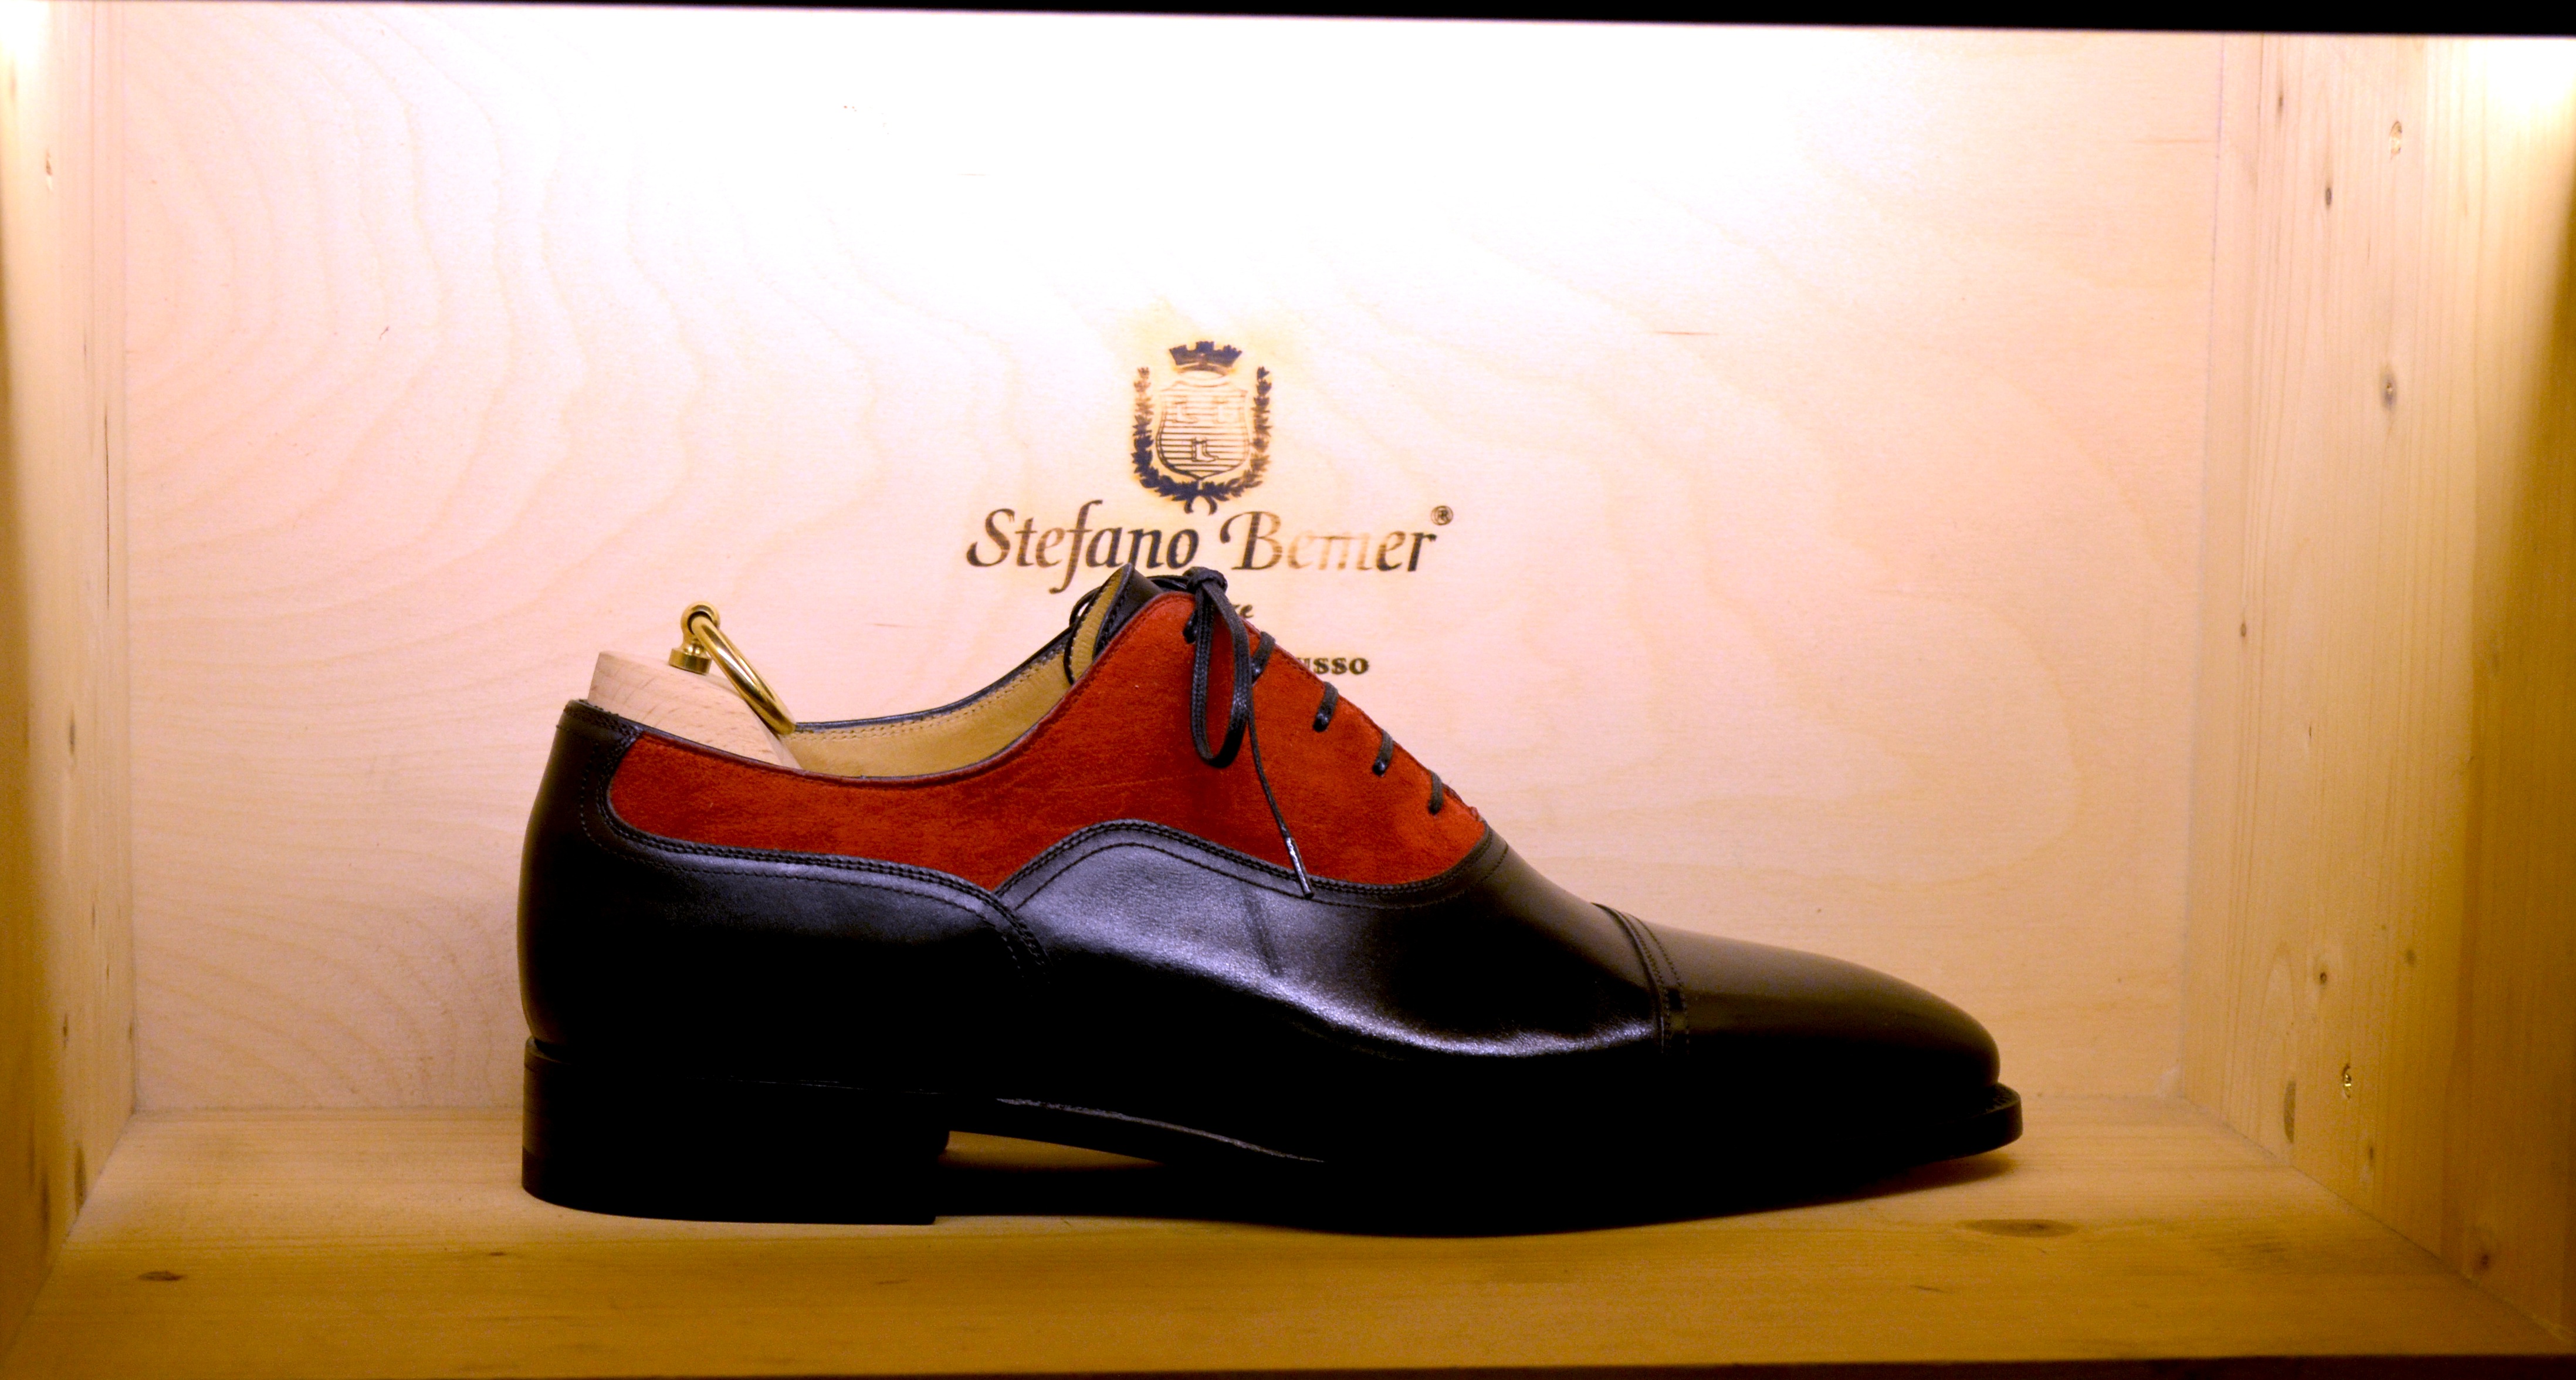 Stefano Bemer shoes exhibited at the BeShoes Symposium in memory of the late-bespoke designer